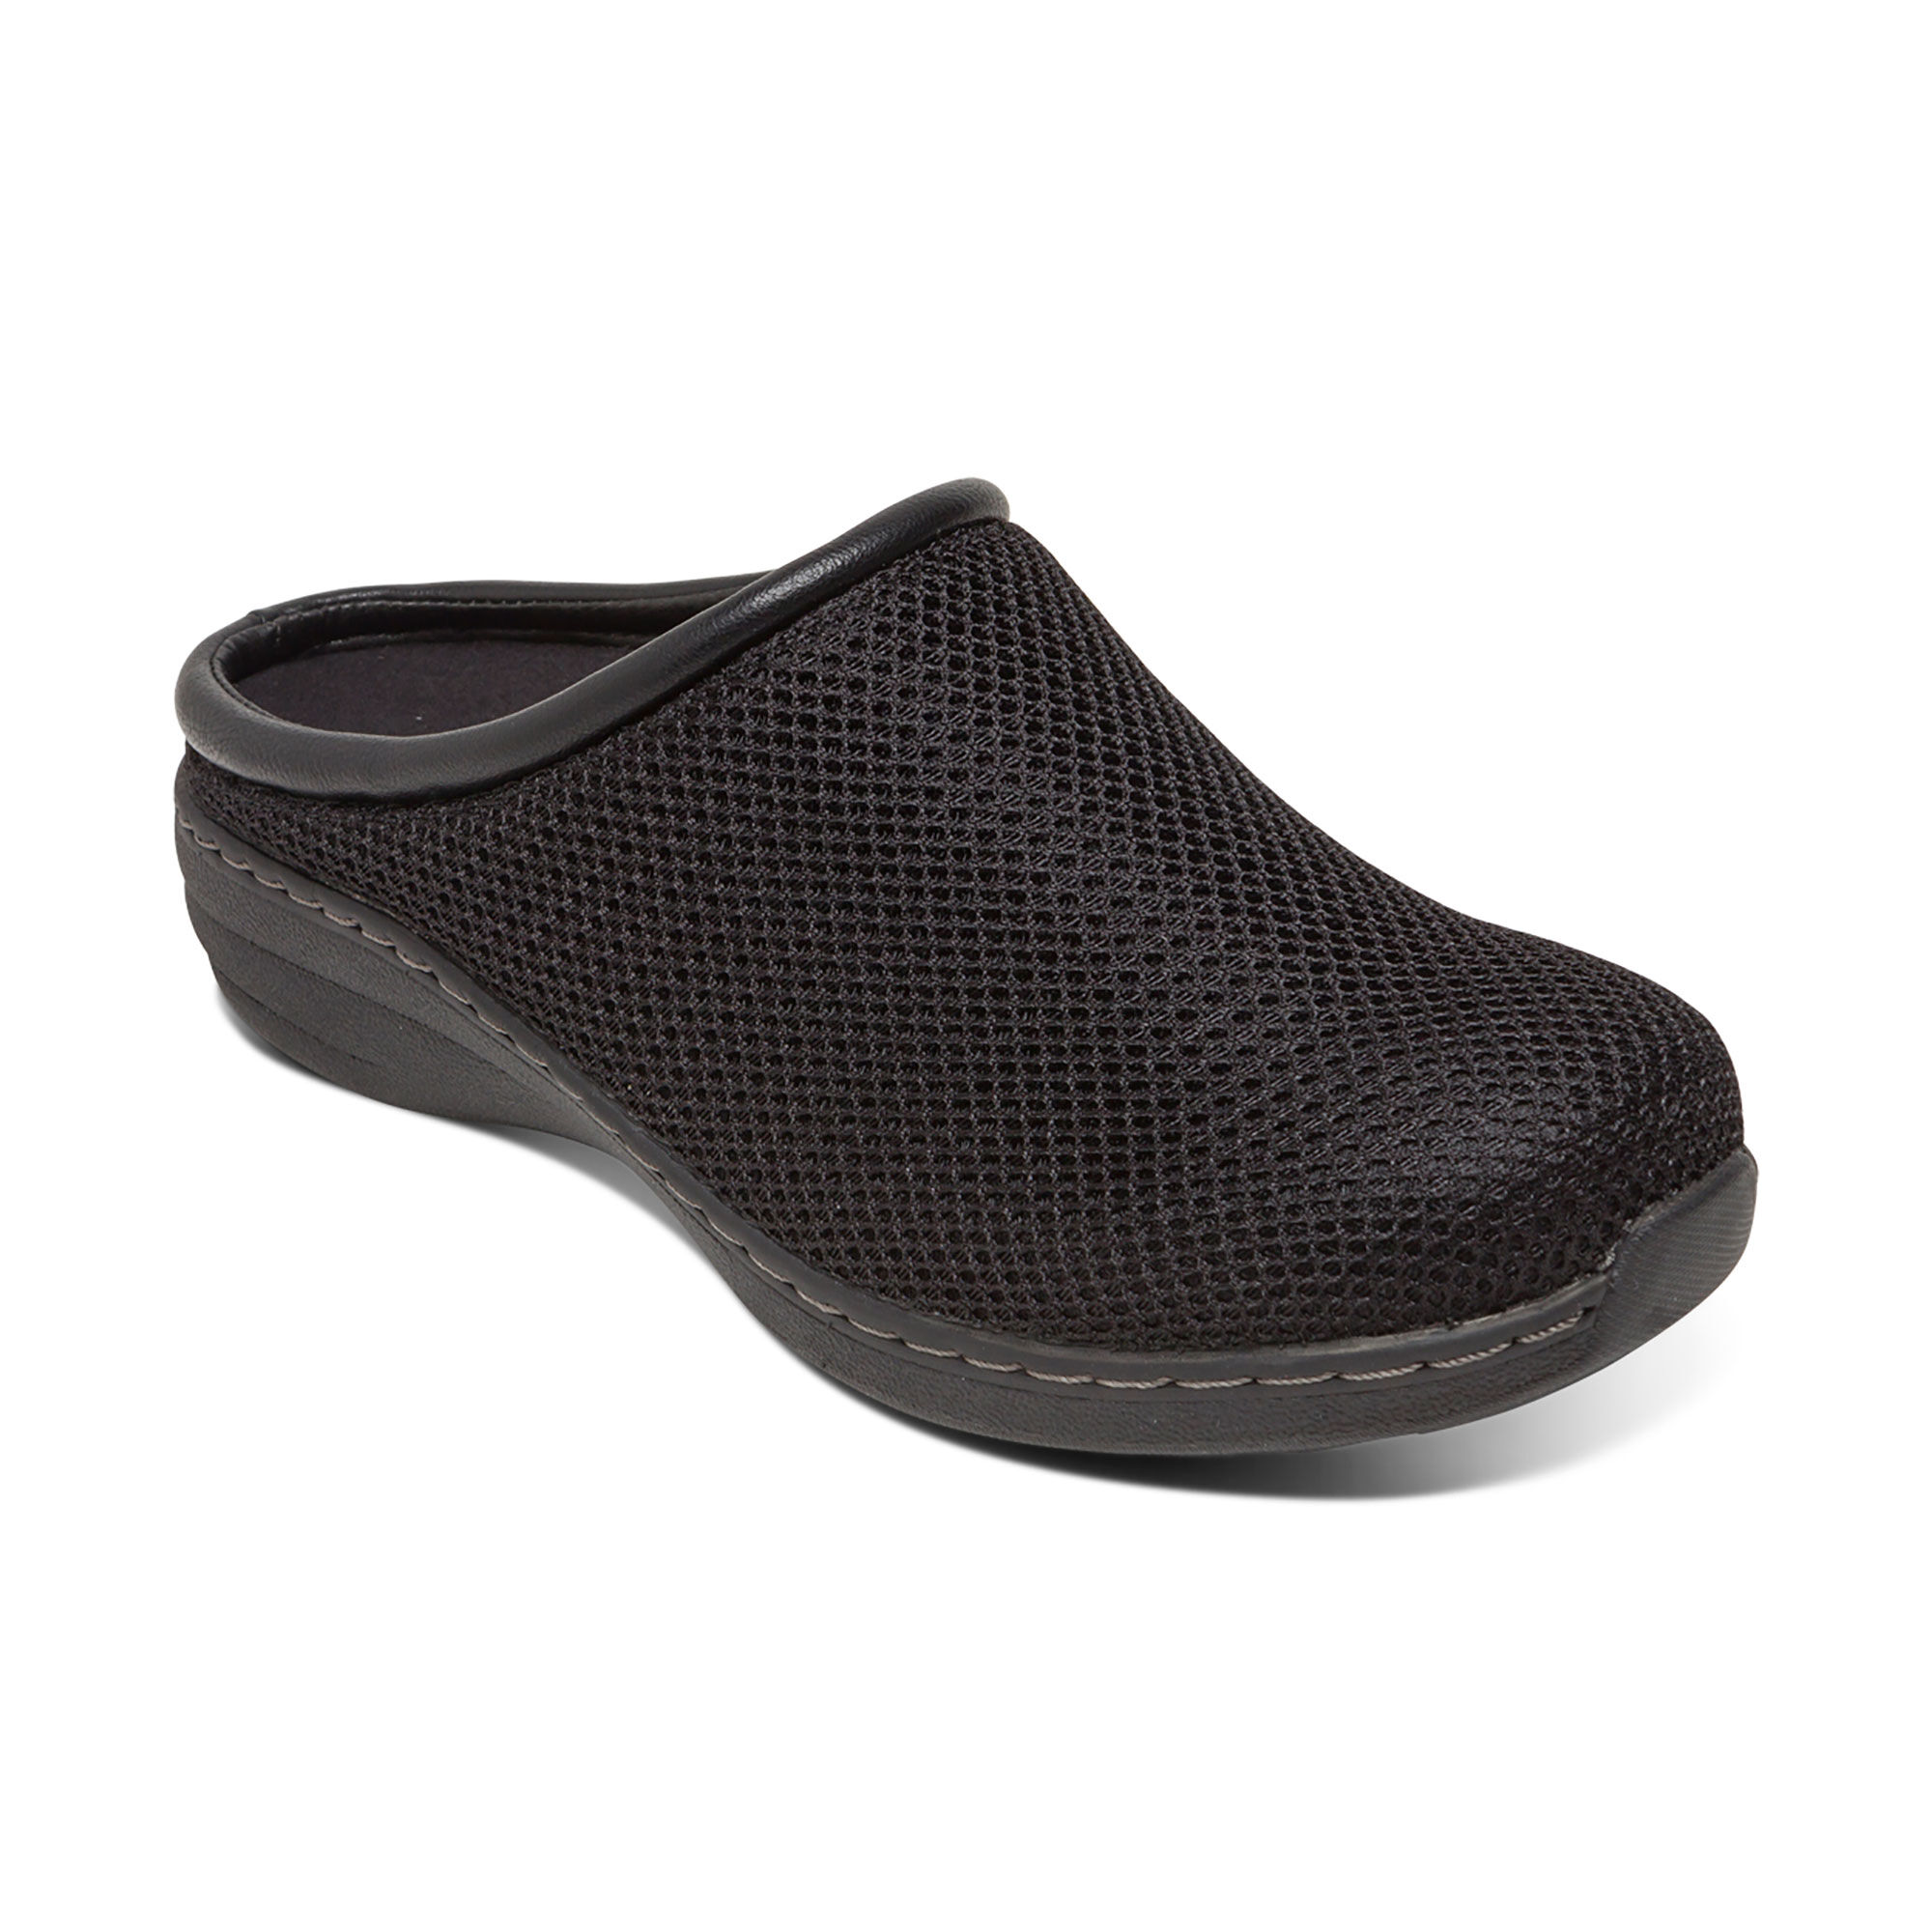 clogs arch support